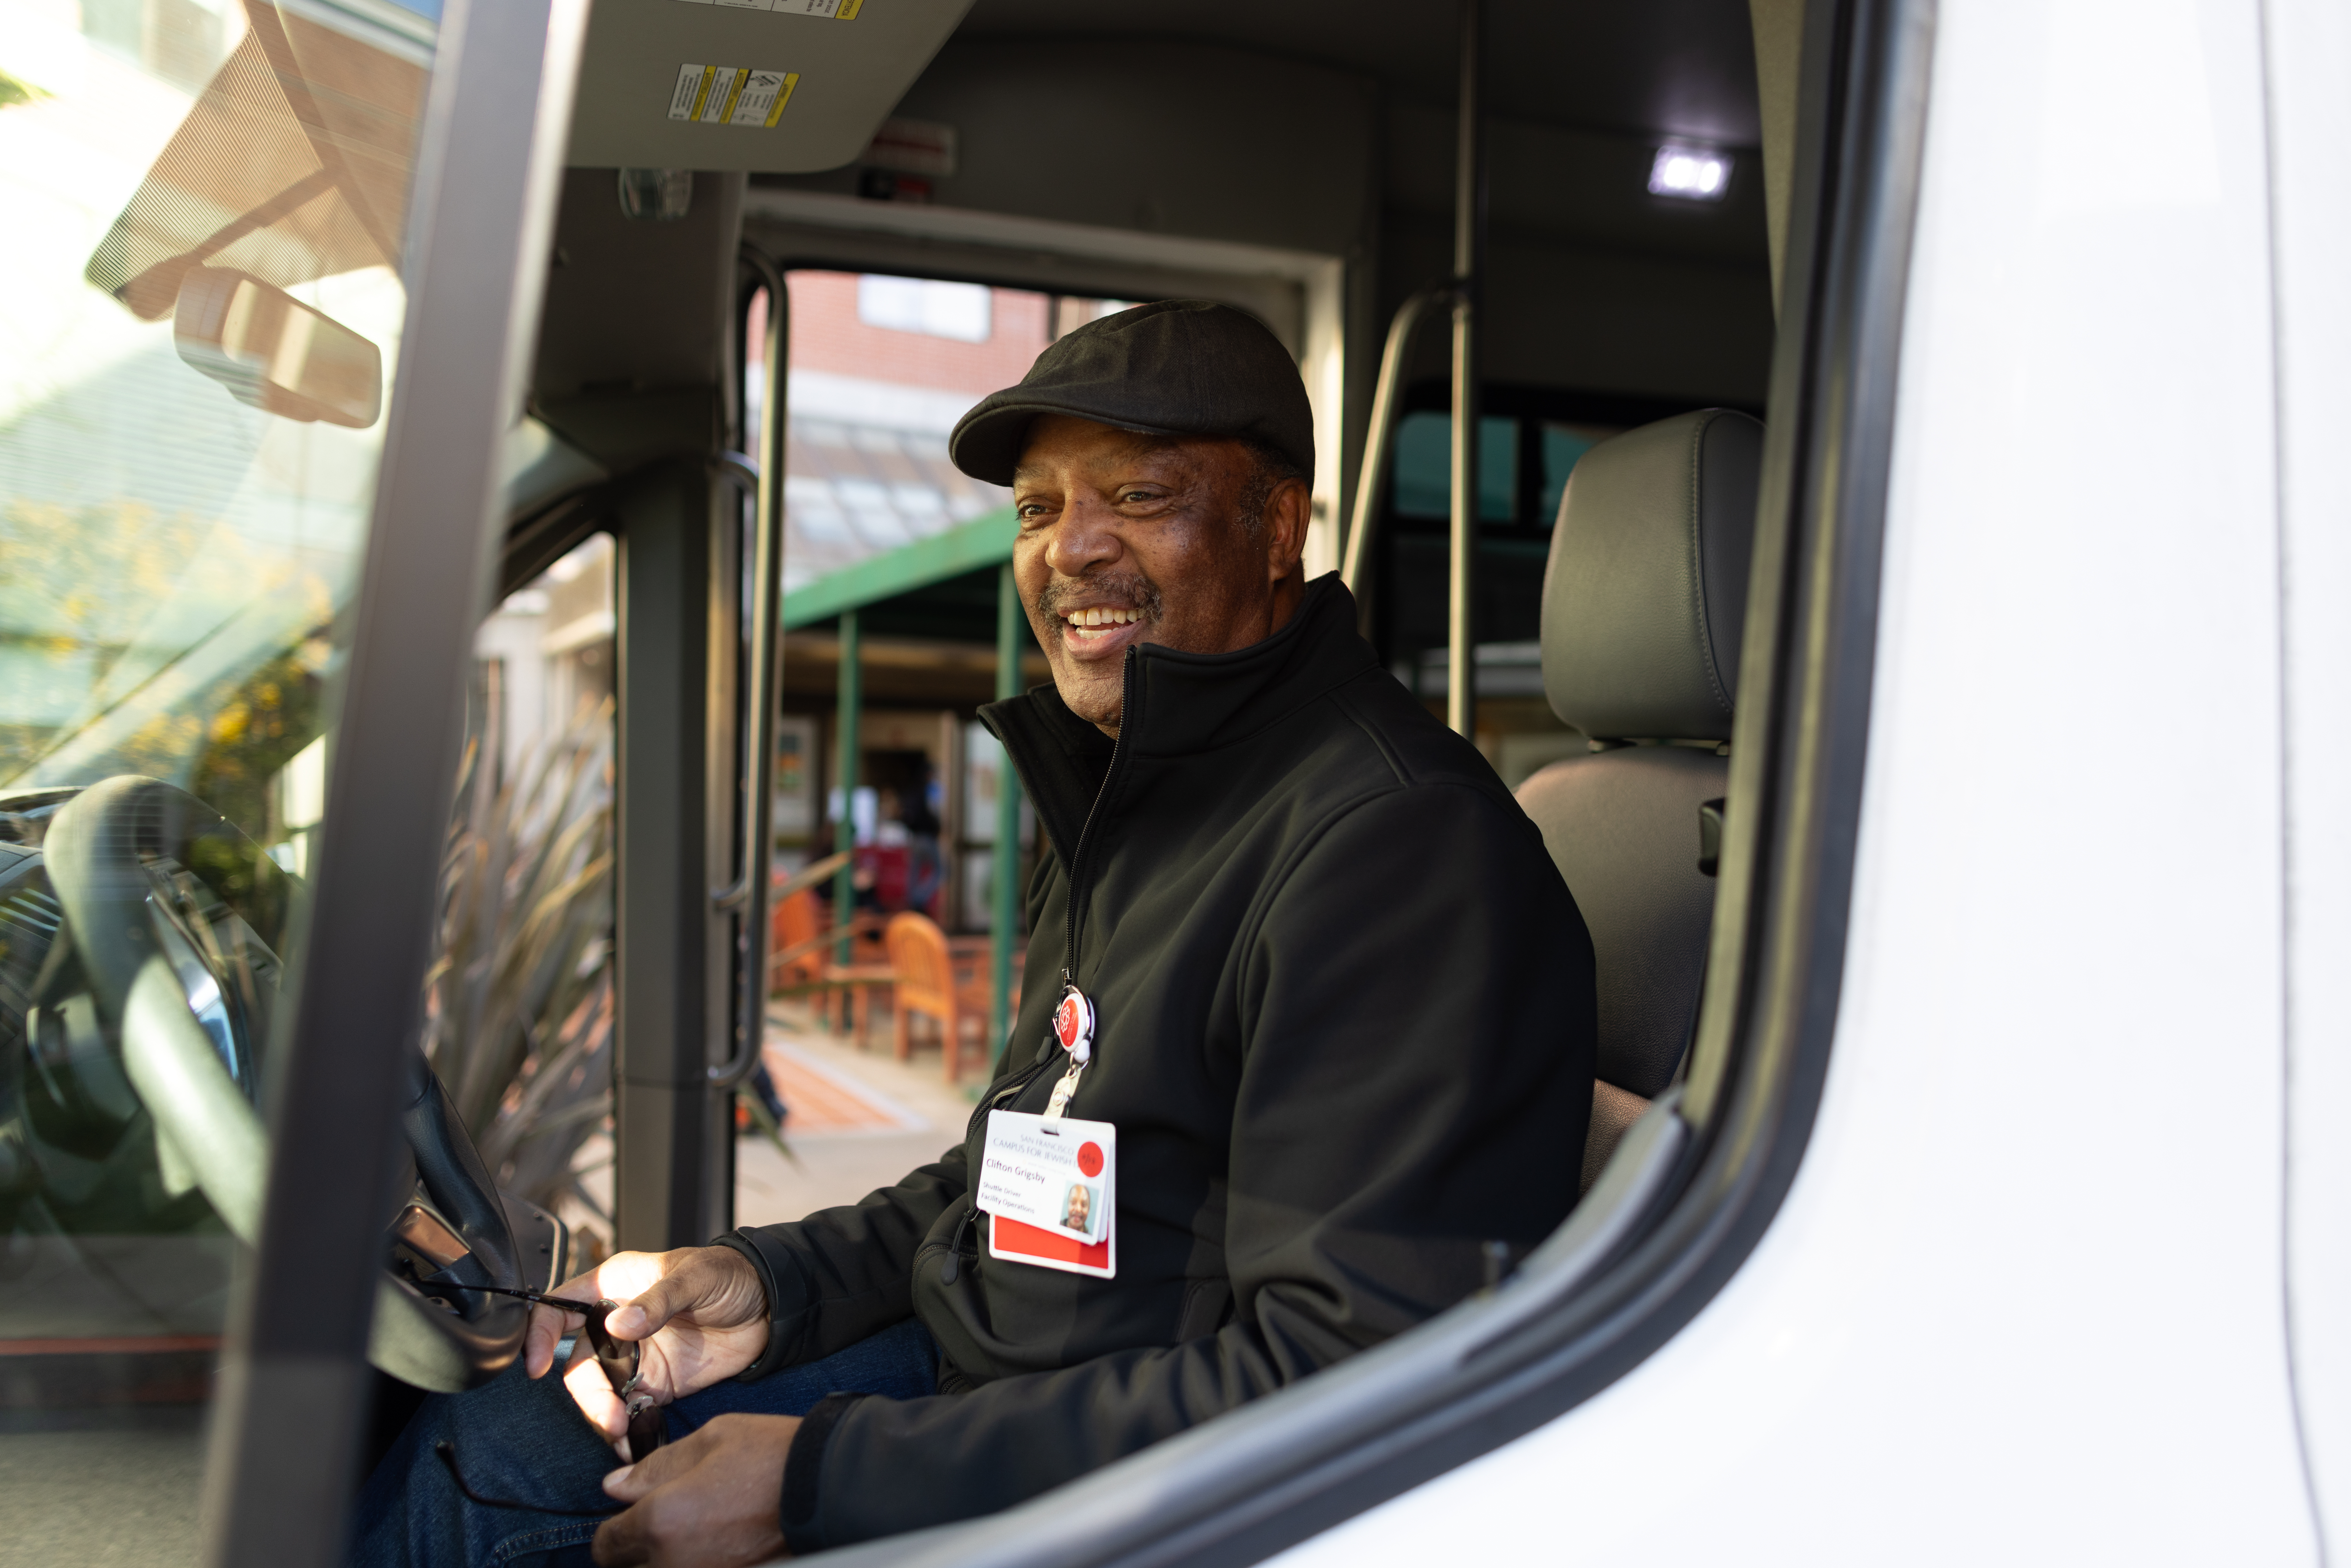 Decades in the Driver’s Seat: Meet Clifton Grigsby, Medical Transportation Driver